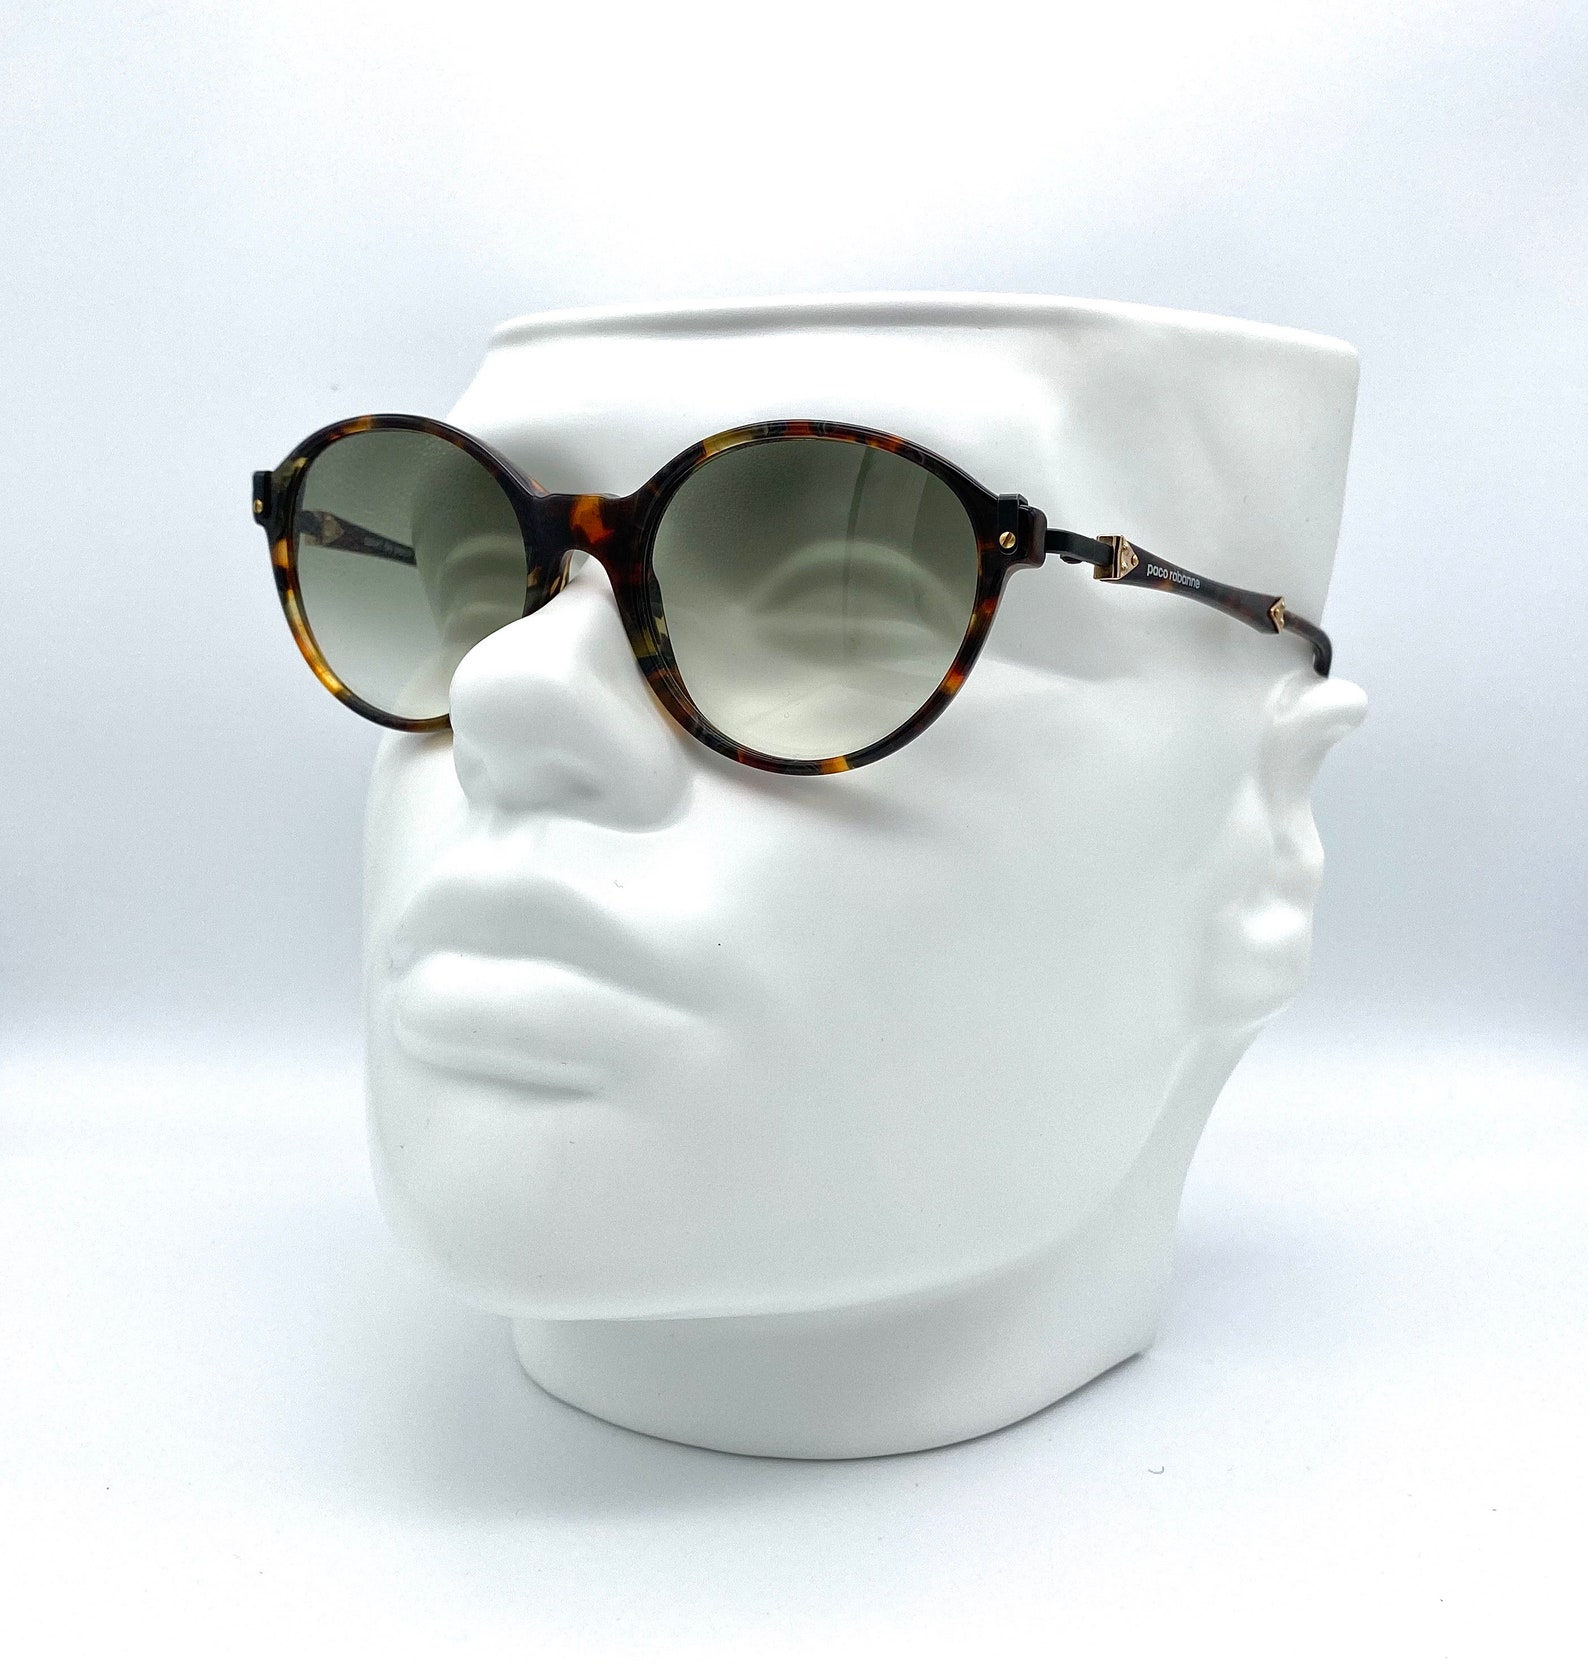 PACO RABANNE Mod. SPORT 2652 Vintage Sunglasses Made in France - Etsy